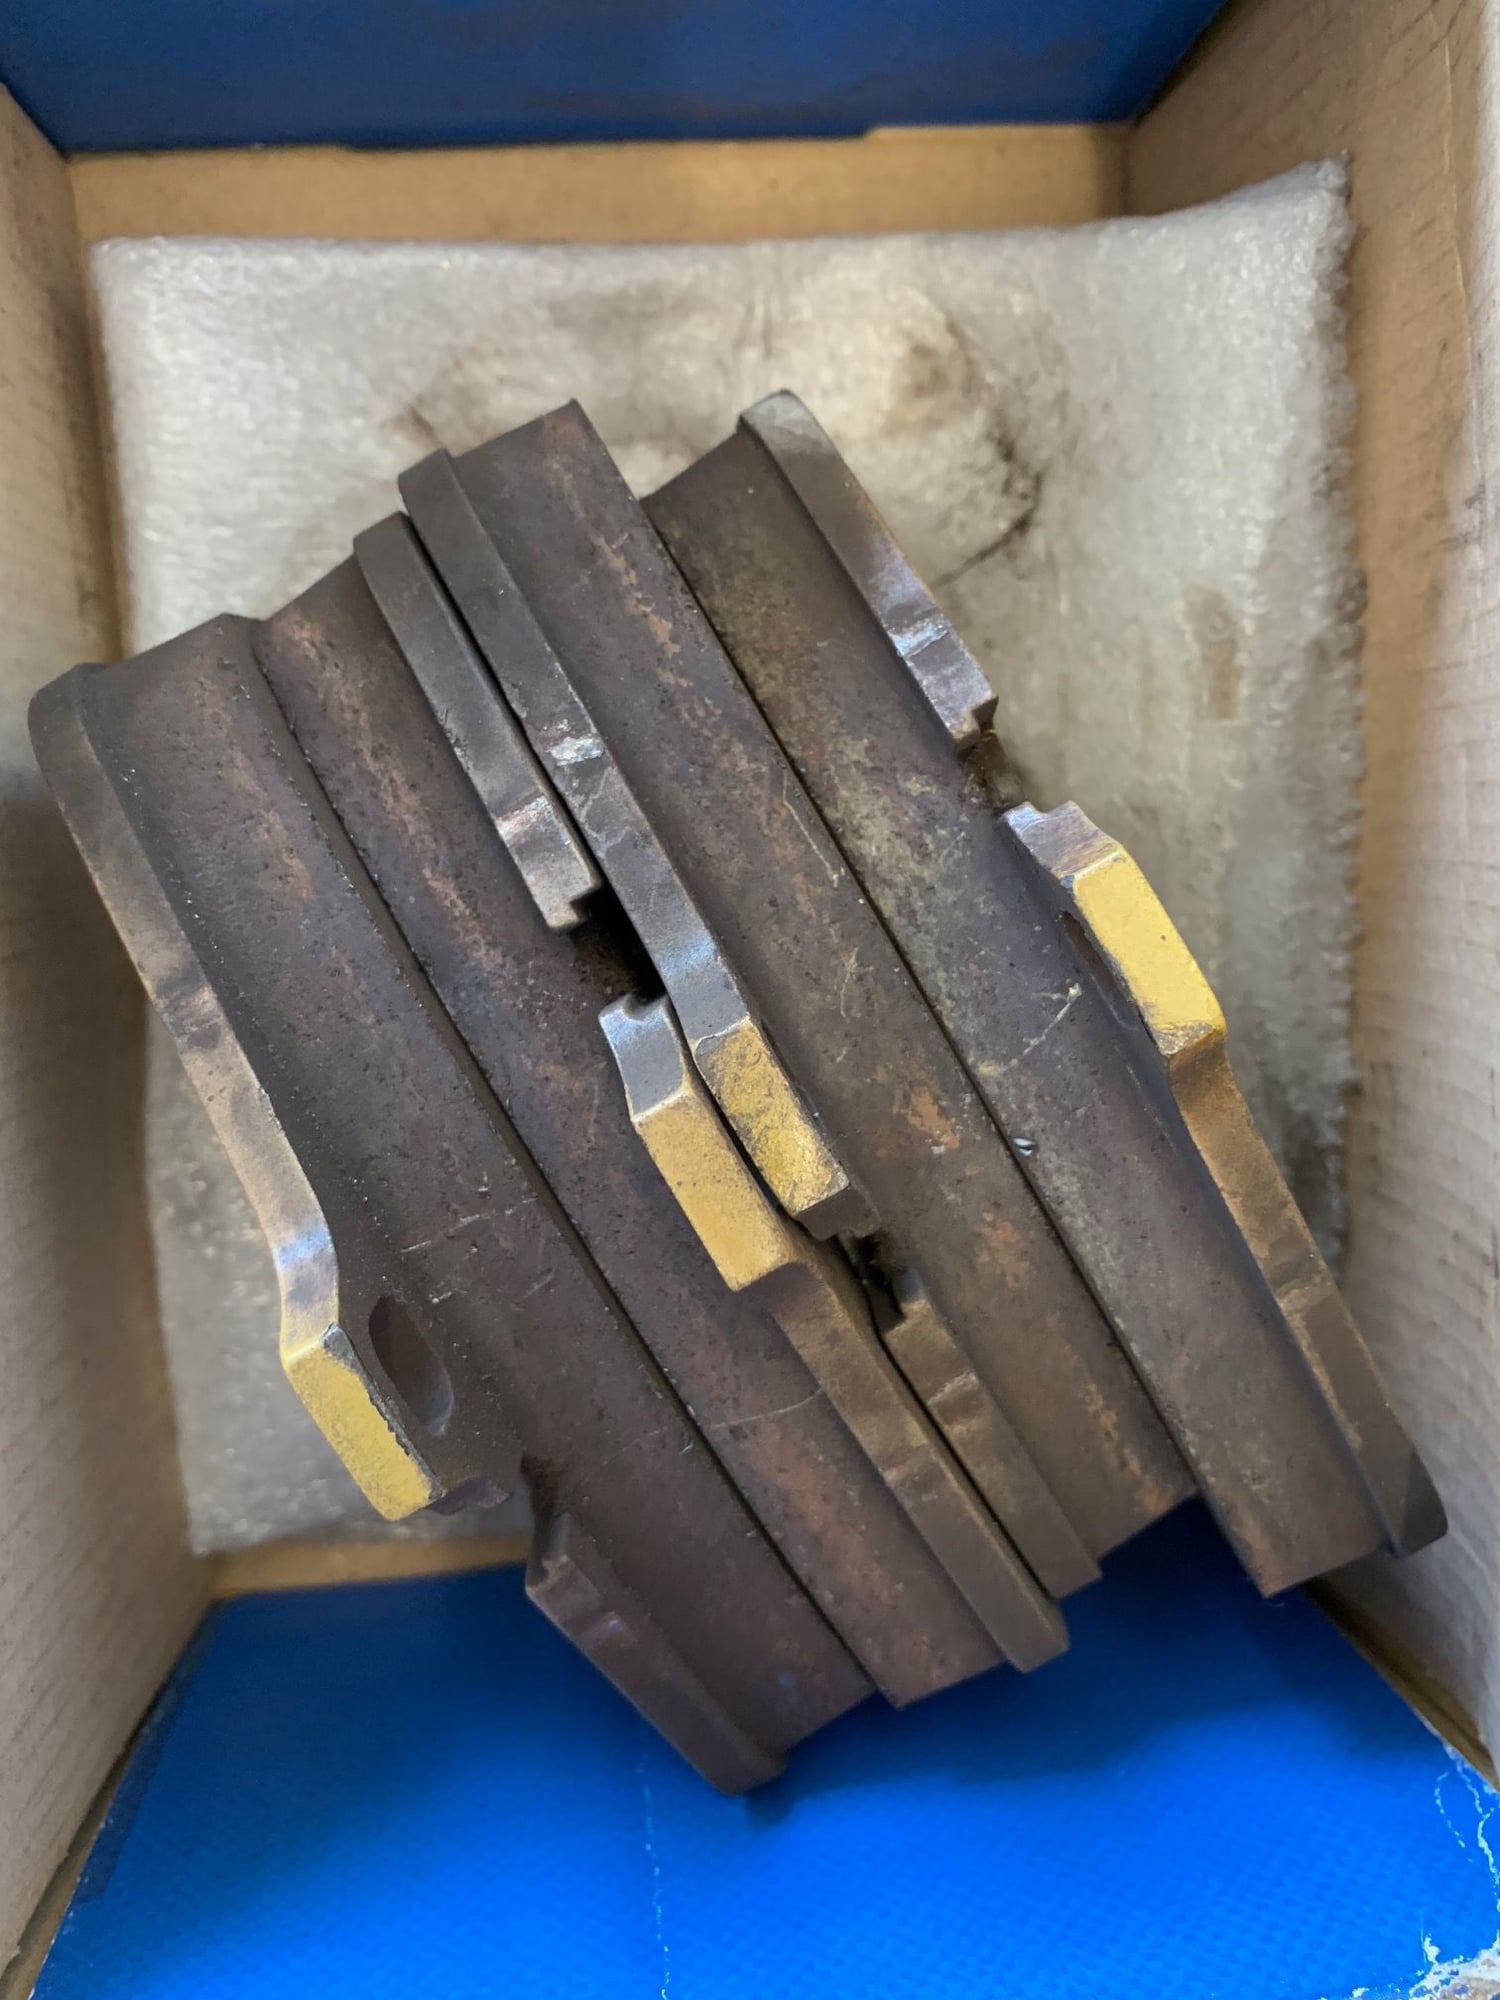 Brakes - Porsche 911 (997.1 or 997.2) Pagid Yellow RS29 pads plus bonus - Used - 2005 to 2011 Porsche 911 - Campbell, CA 95008, United States